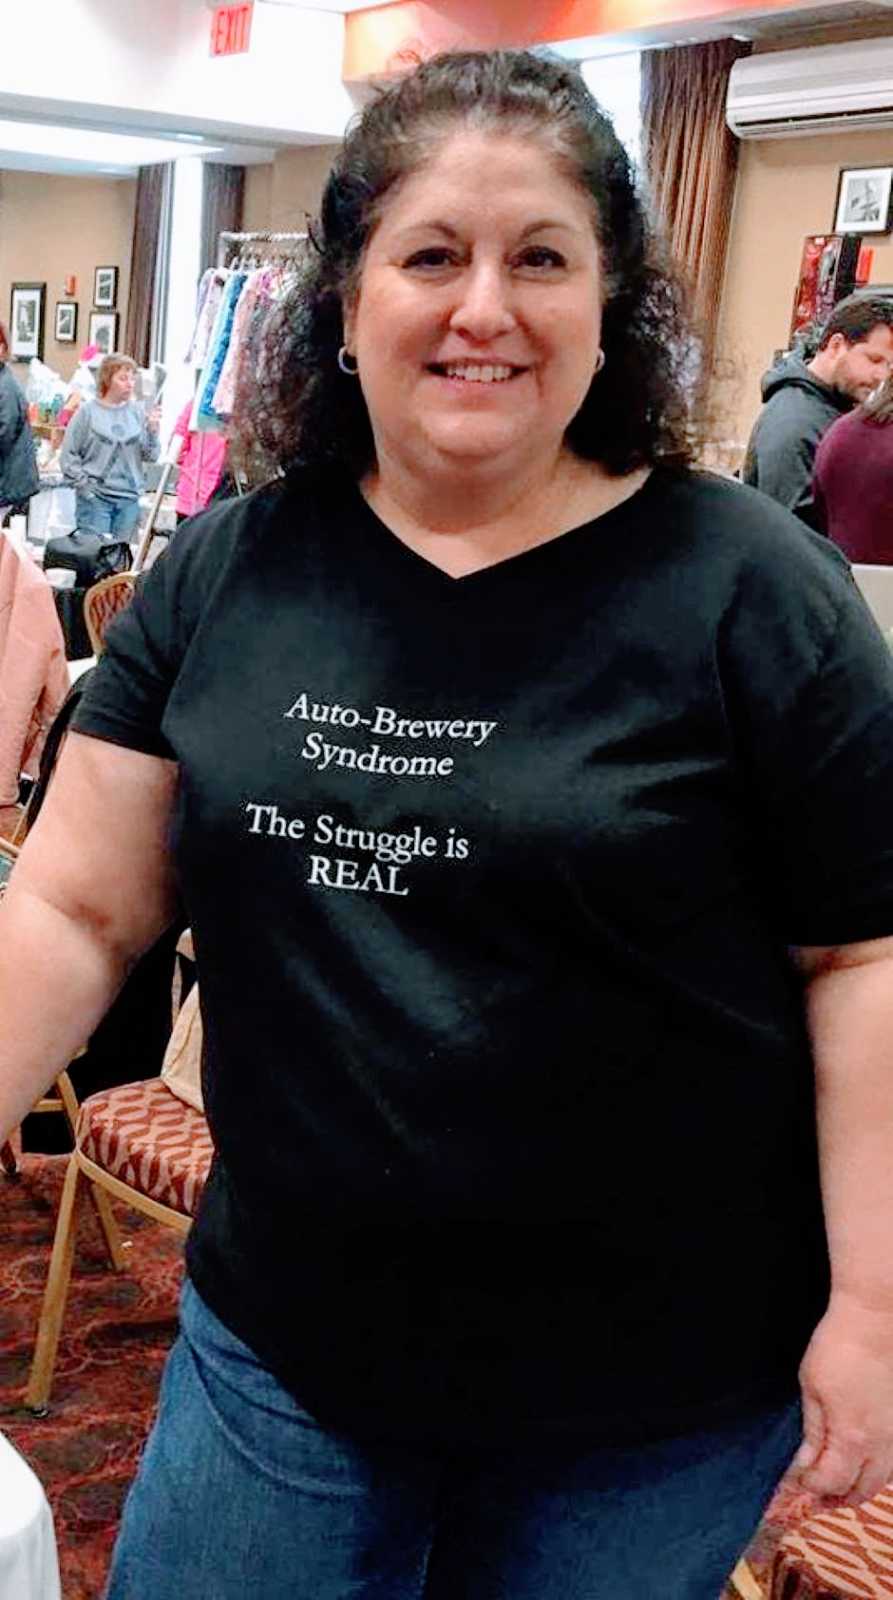 Woman advocating for Auto-Brewery Syndrome wears shirt that reads "Auto-Brewery Syndrome, The struggle is REAL"